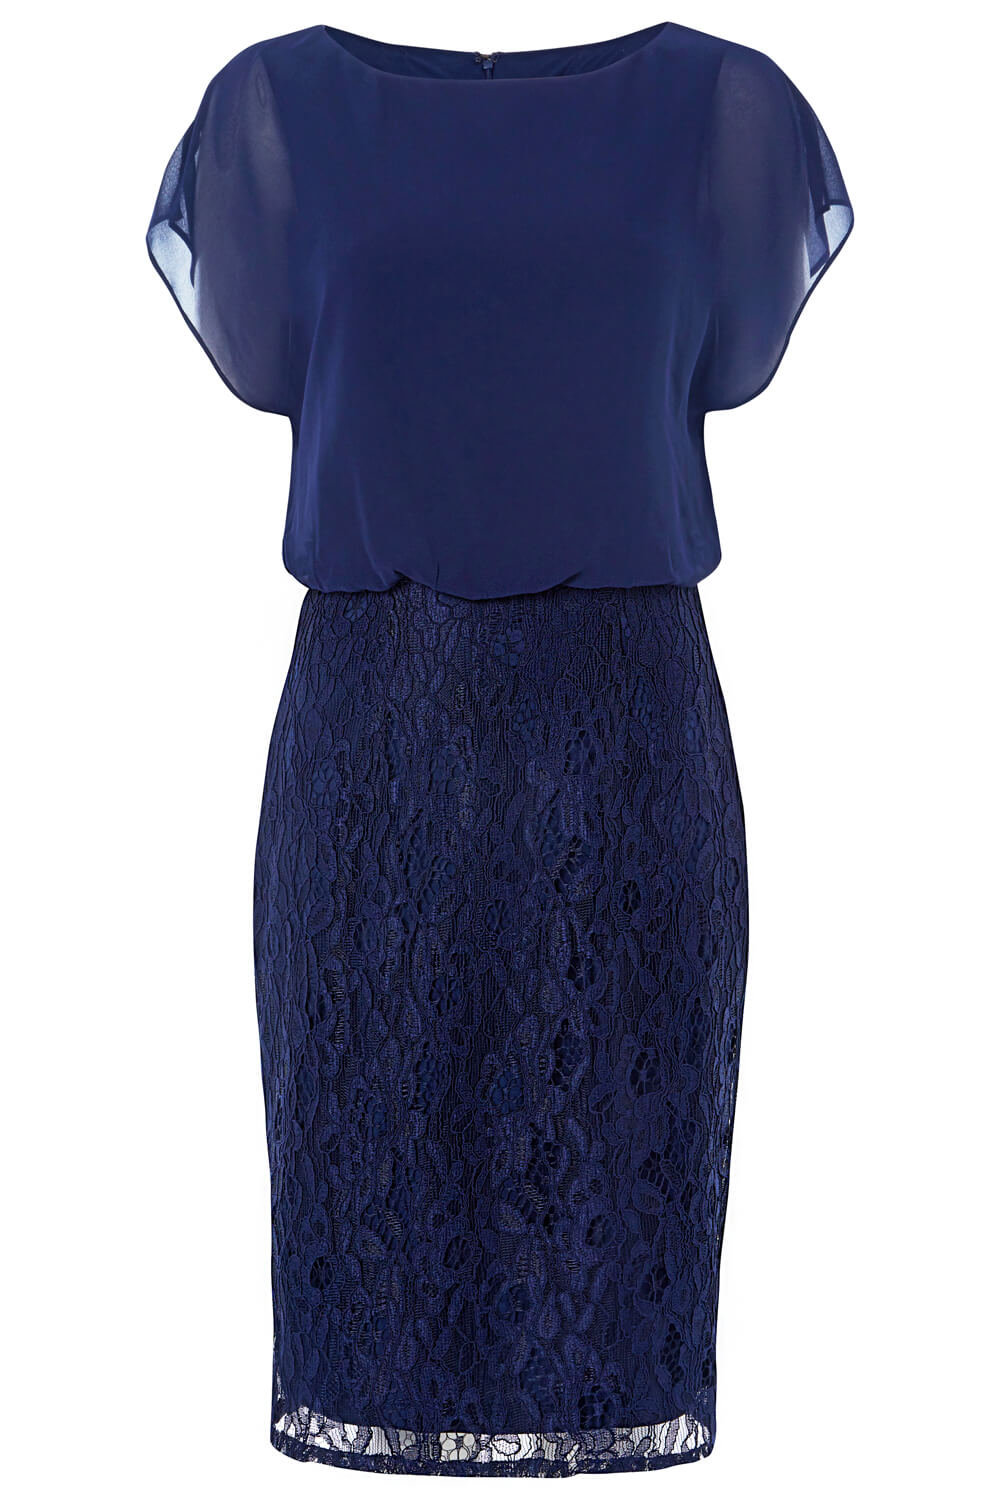 Navy  Chiffon Lace Fitted Dress, Image 4 of 4